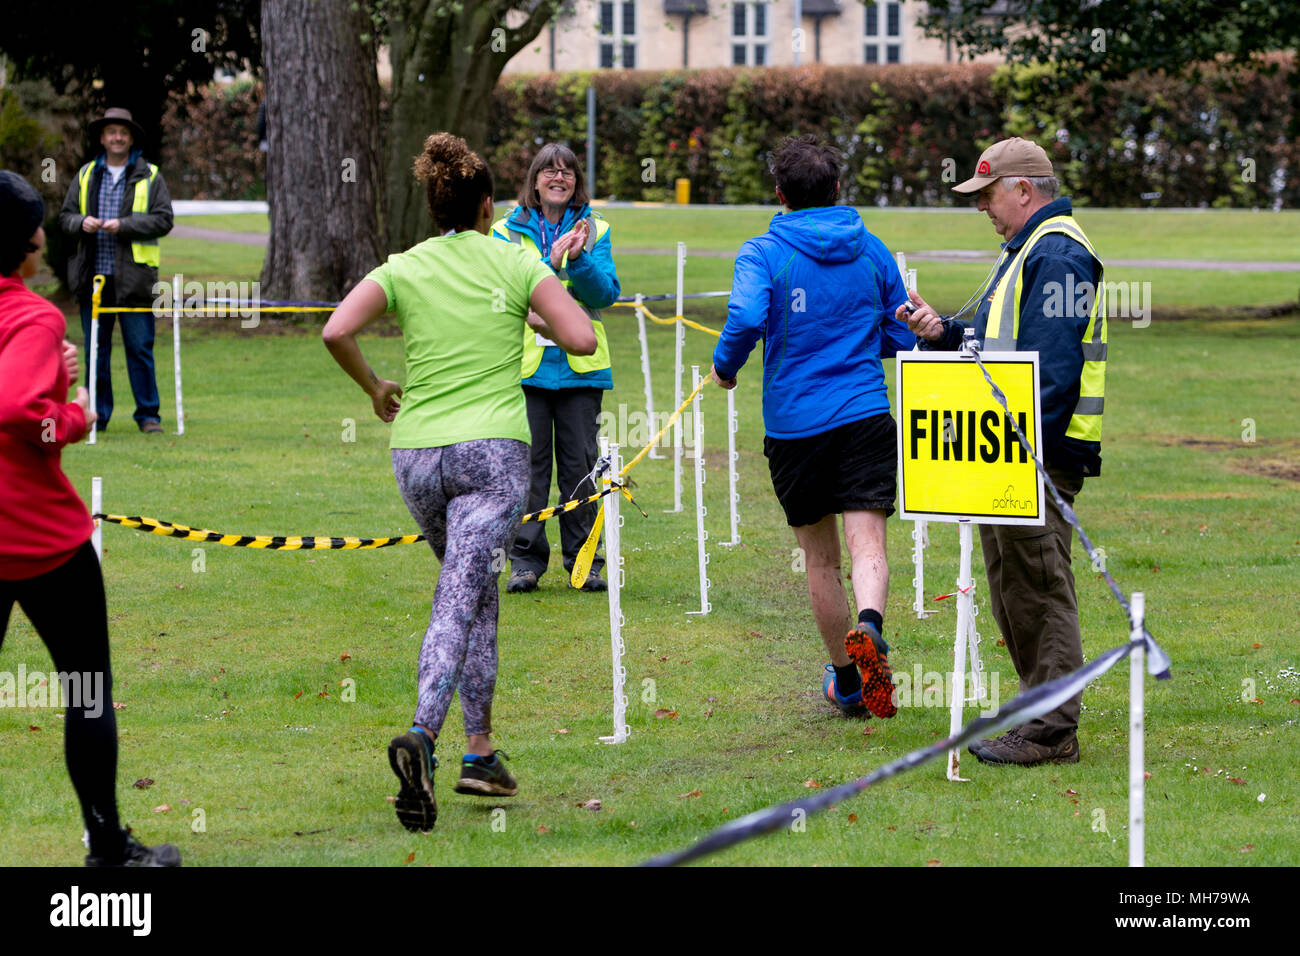 Runners finishing and being timed by a volunteer in the Cirencester parkrun, Gloucestershire, UK Stock Photo